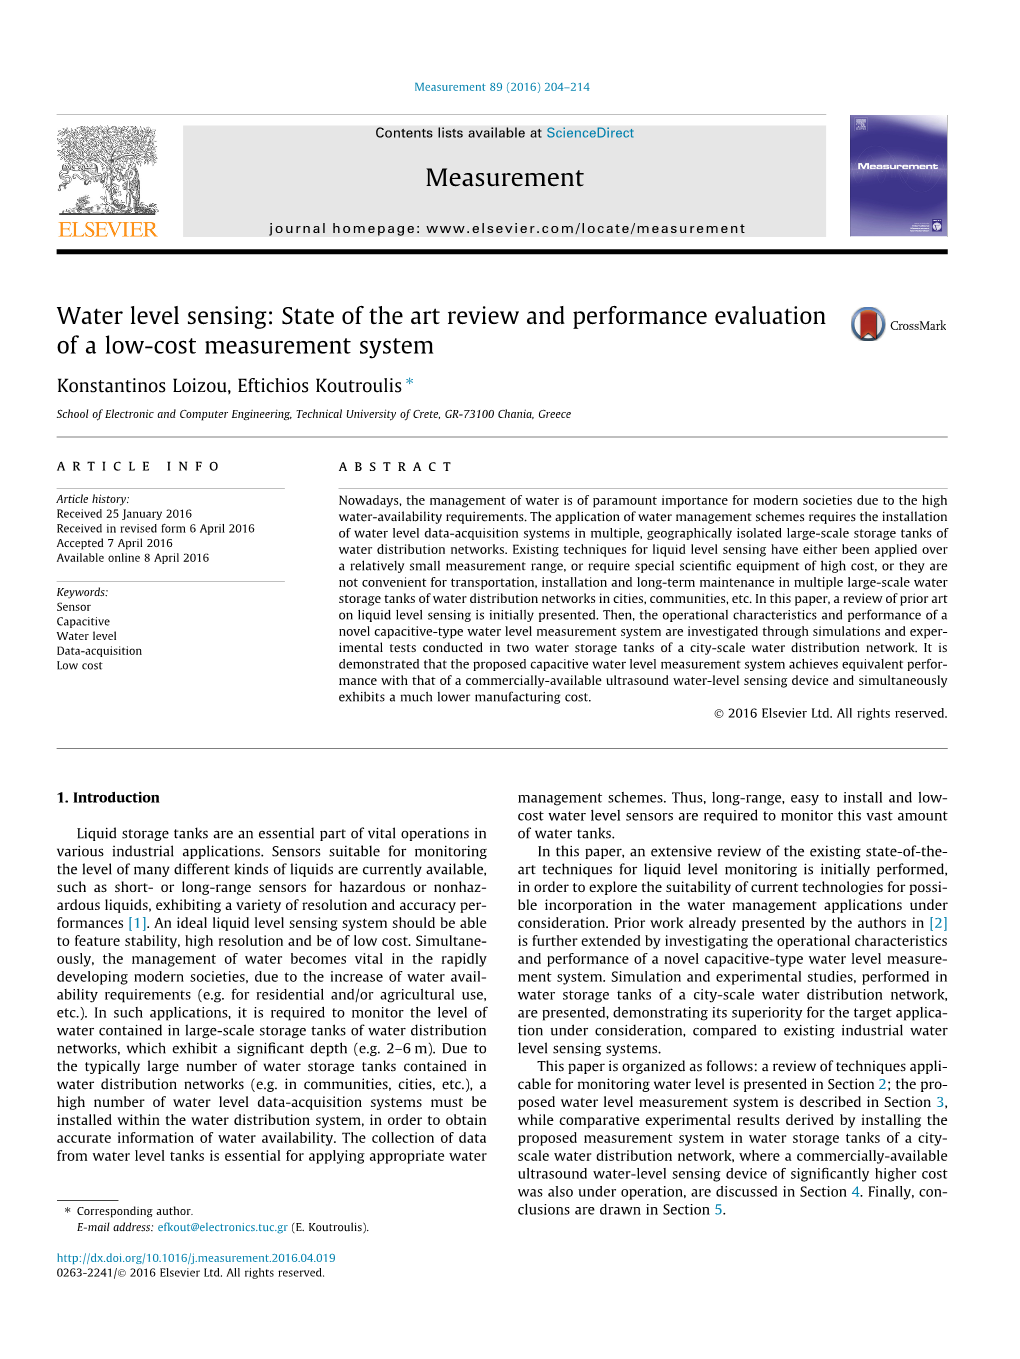 Water Level Sensing: State of the Art Review and Performance Evaluation of a Low-Cost Measurement System ⇑ Konstantinos Loizou, Eftichios Koutroulis